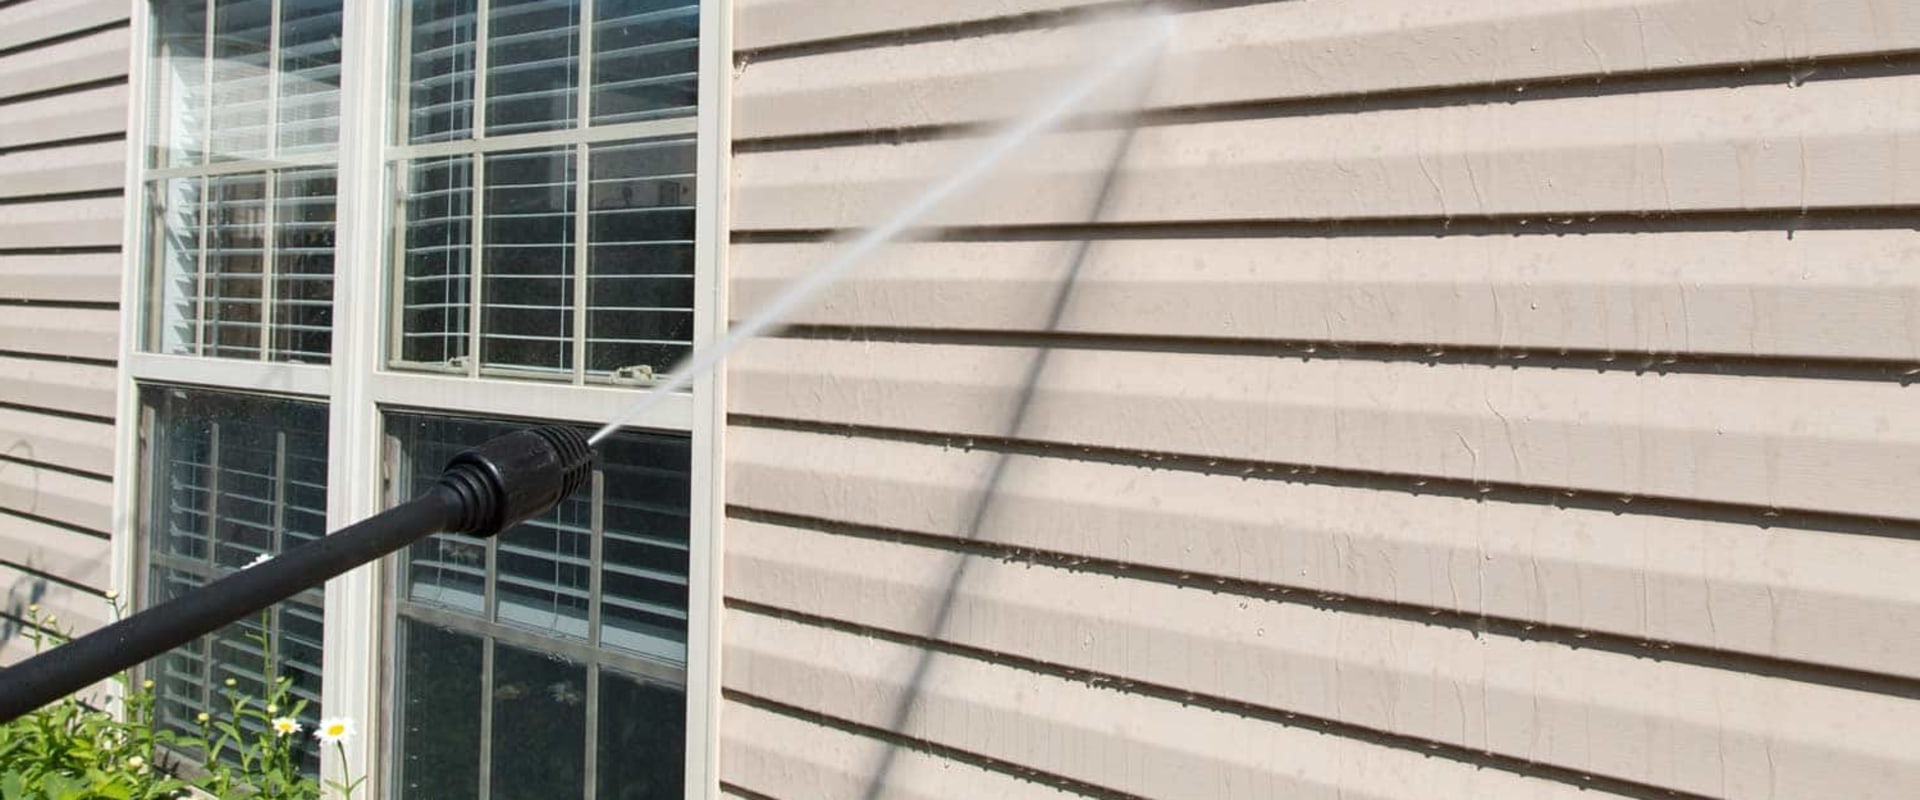 Can I Pressure Wash My Siding Safely?